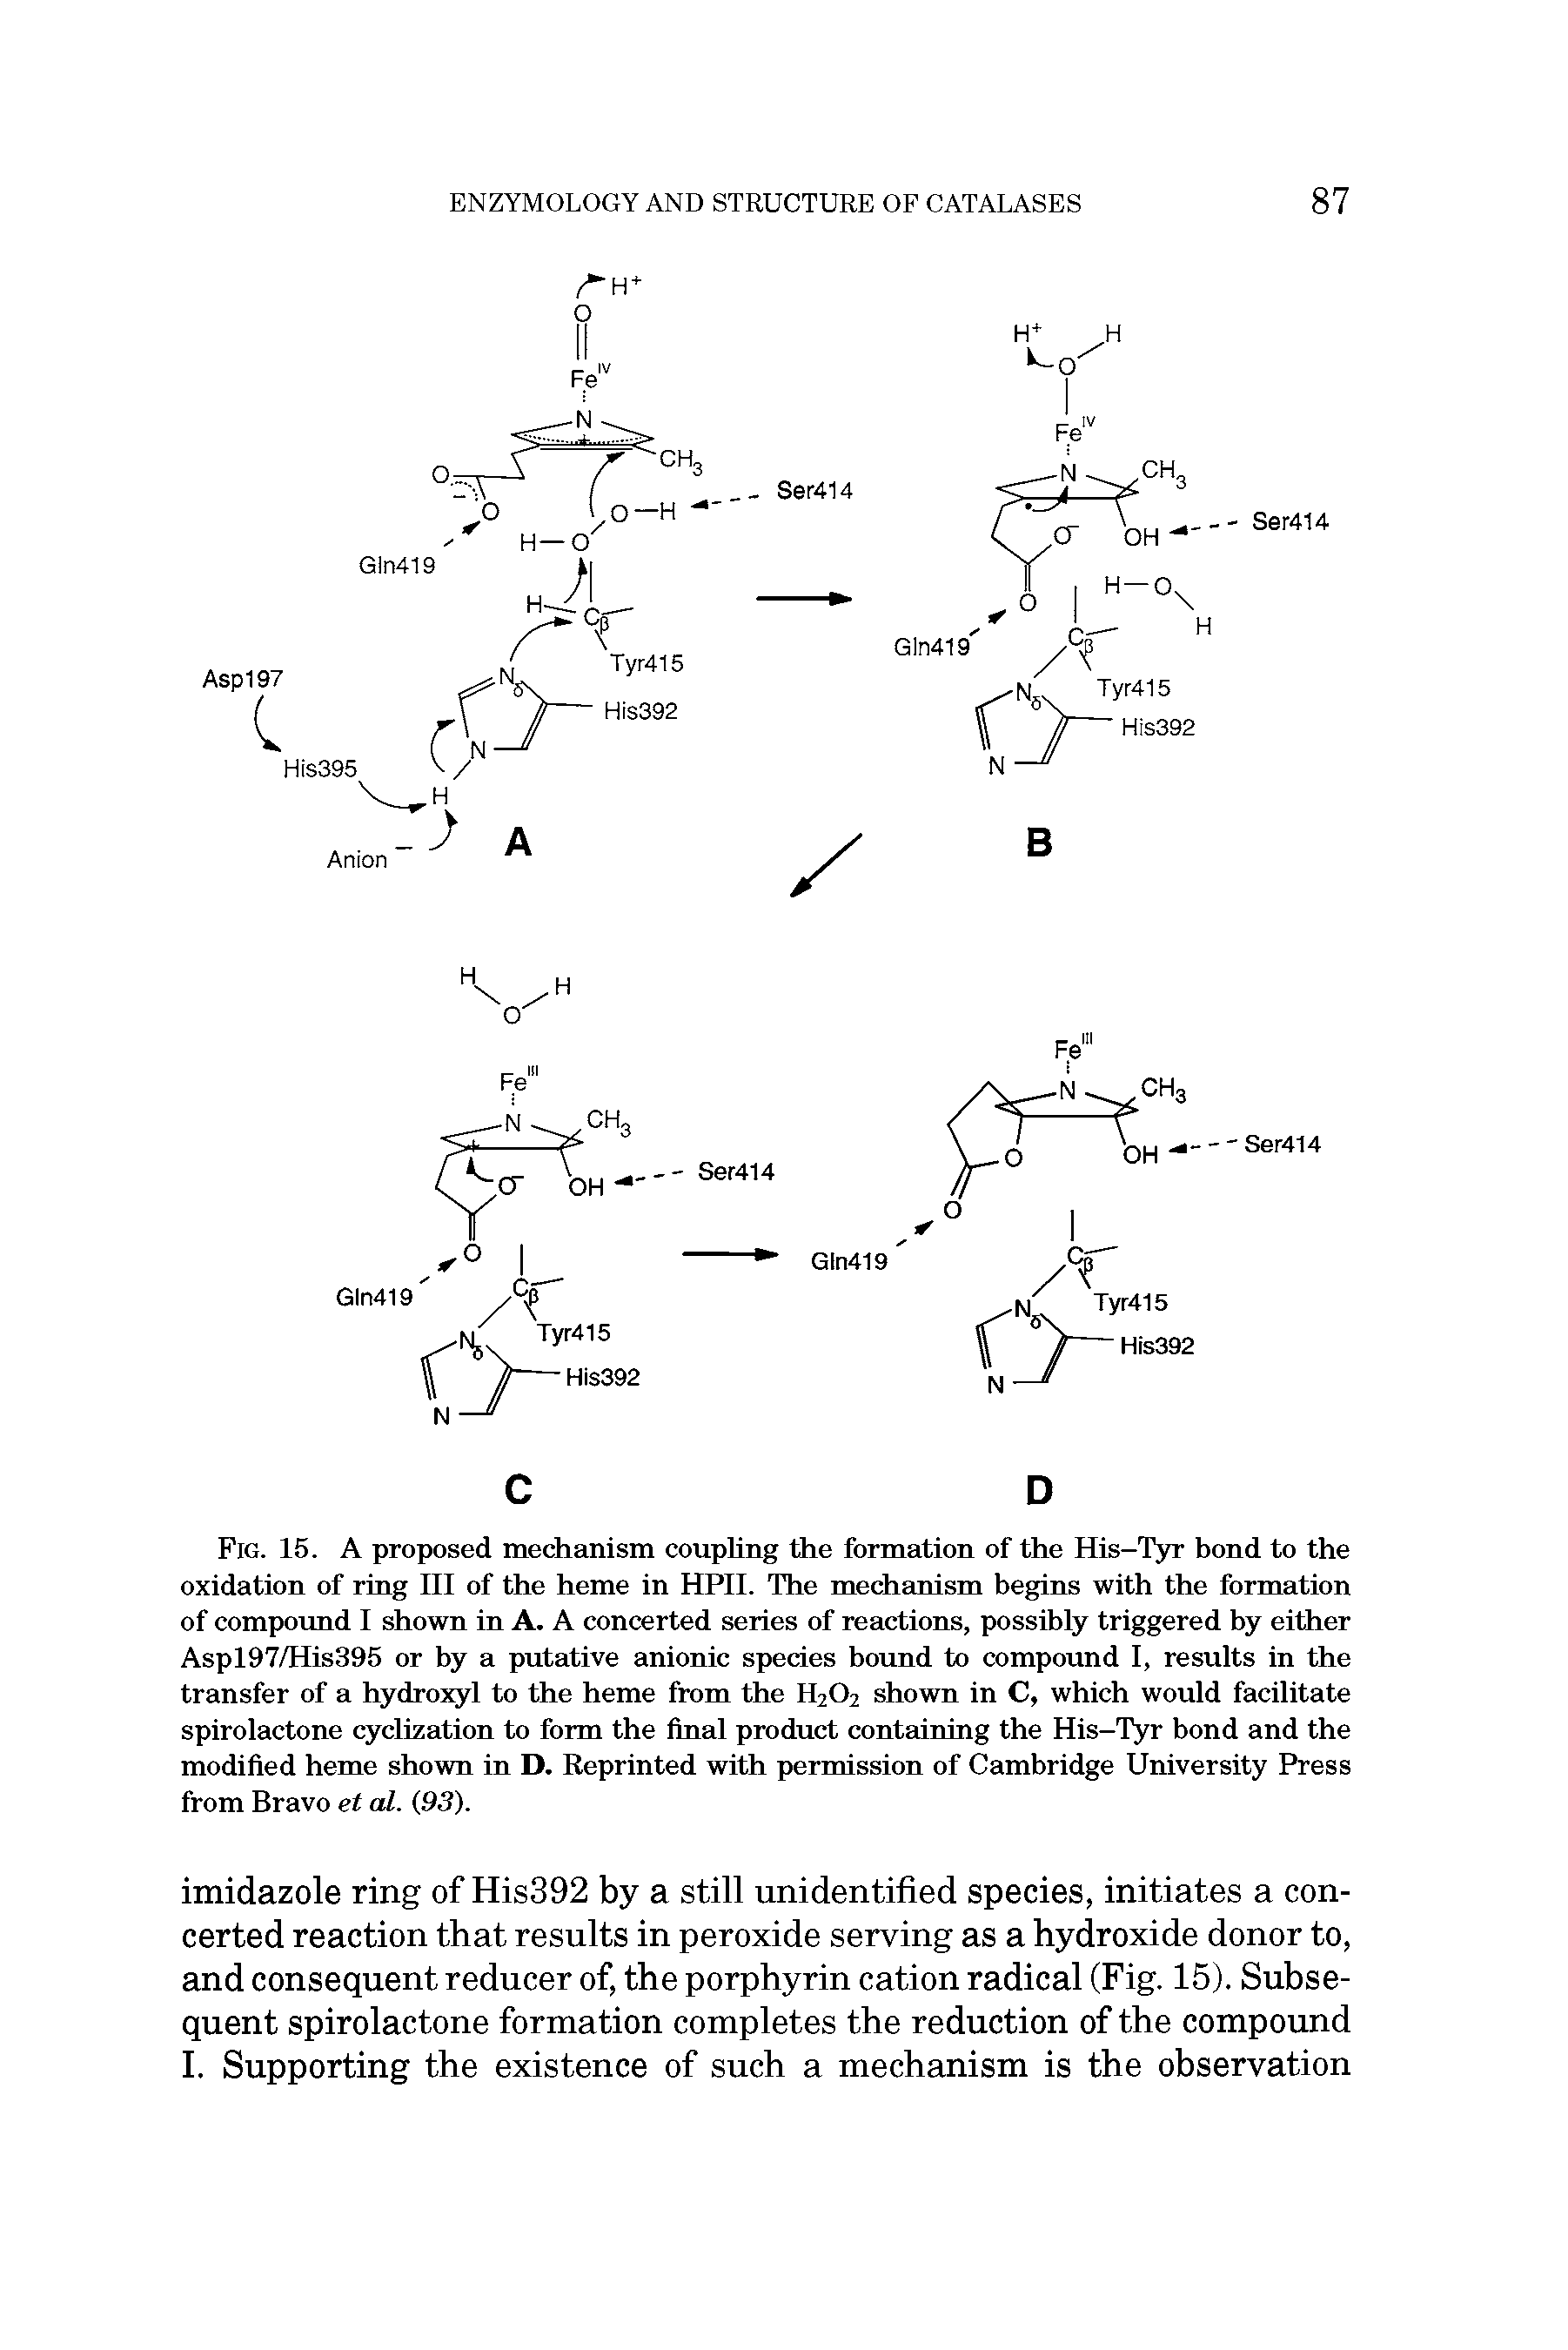 Fig. 15. A proposed mechanism coupling the formation of the His-Tyr bond to the oxidation of ring III of the heme in HPII. The mechanism begins with the formation of compound I shown in A. A concerted series of reactions, possibly triggered by either Aspl97/His395 or by a putative anionic species bound to compound I, results in the transfer of a hydroxyl to the heme from the H2O2 shown in C, which would facilitate spirolactone cyclization to form the final product containing the His-Tyr bond and the modified heme shown in D. Reprinted with permission of Cambridge University Press from Bravo et al. (.93).